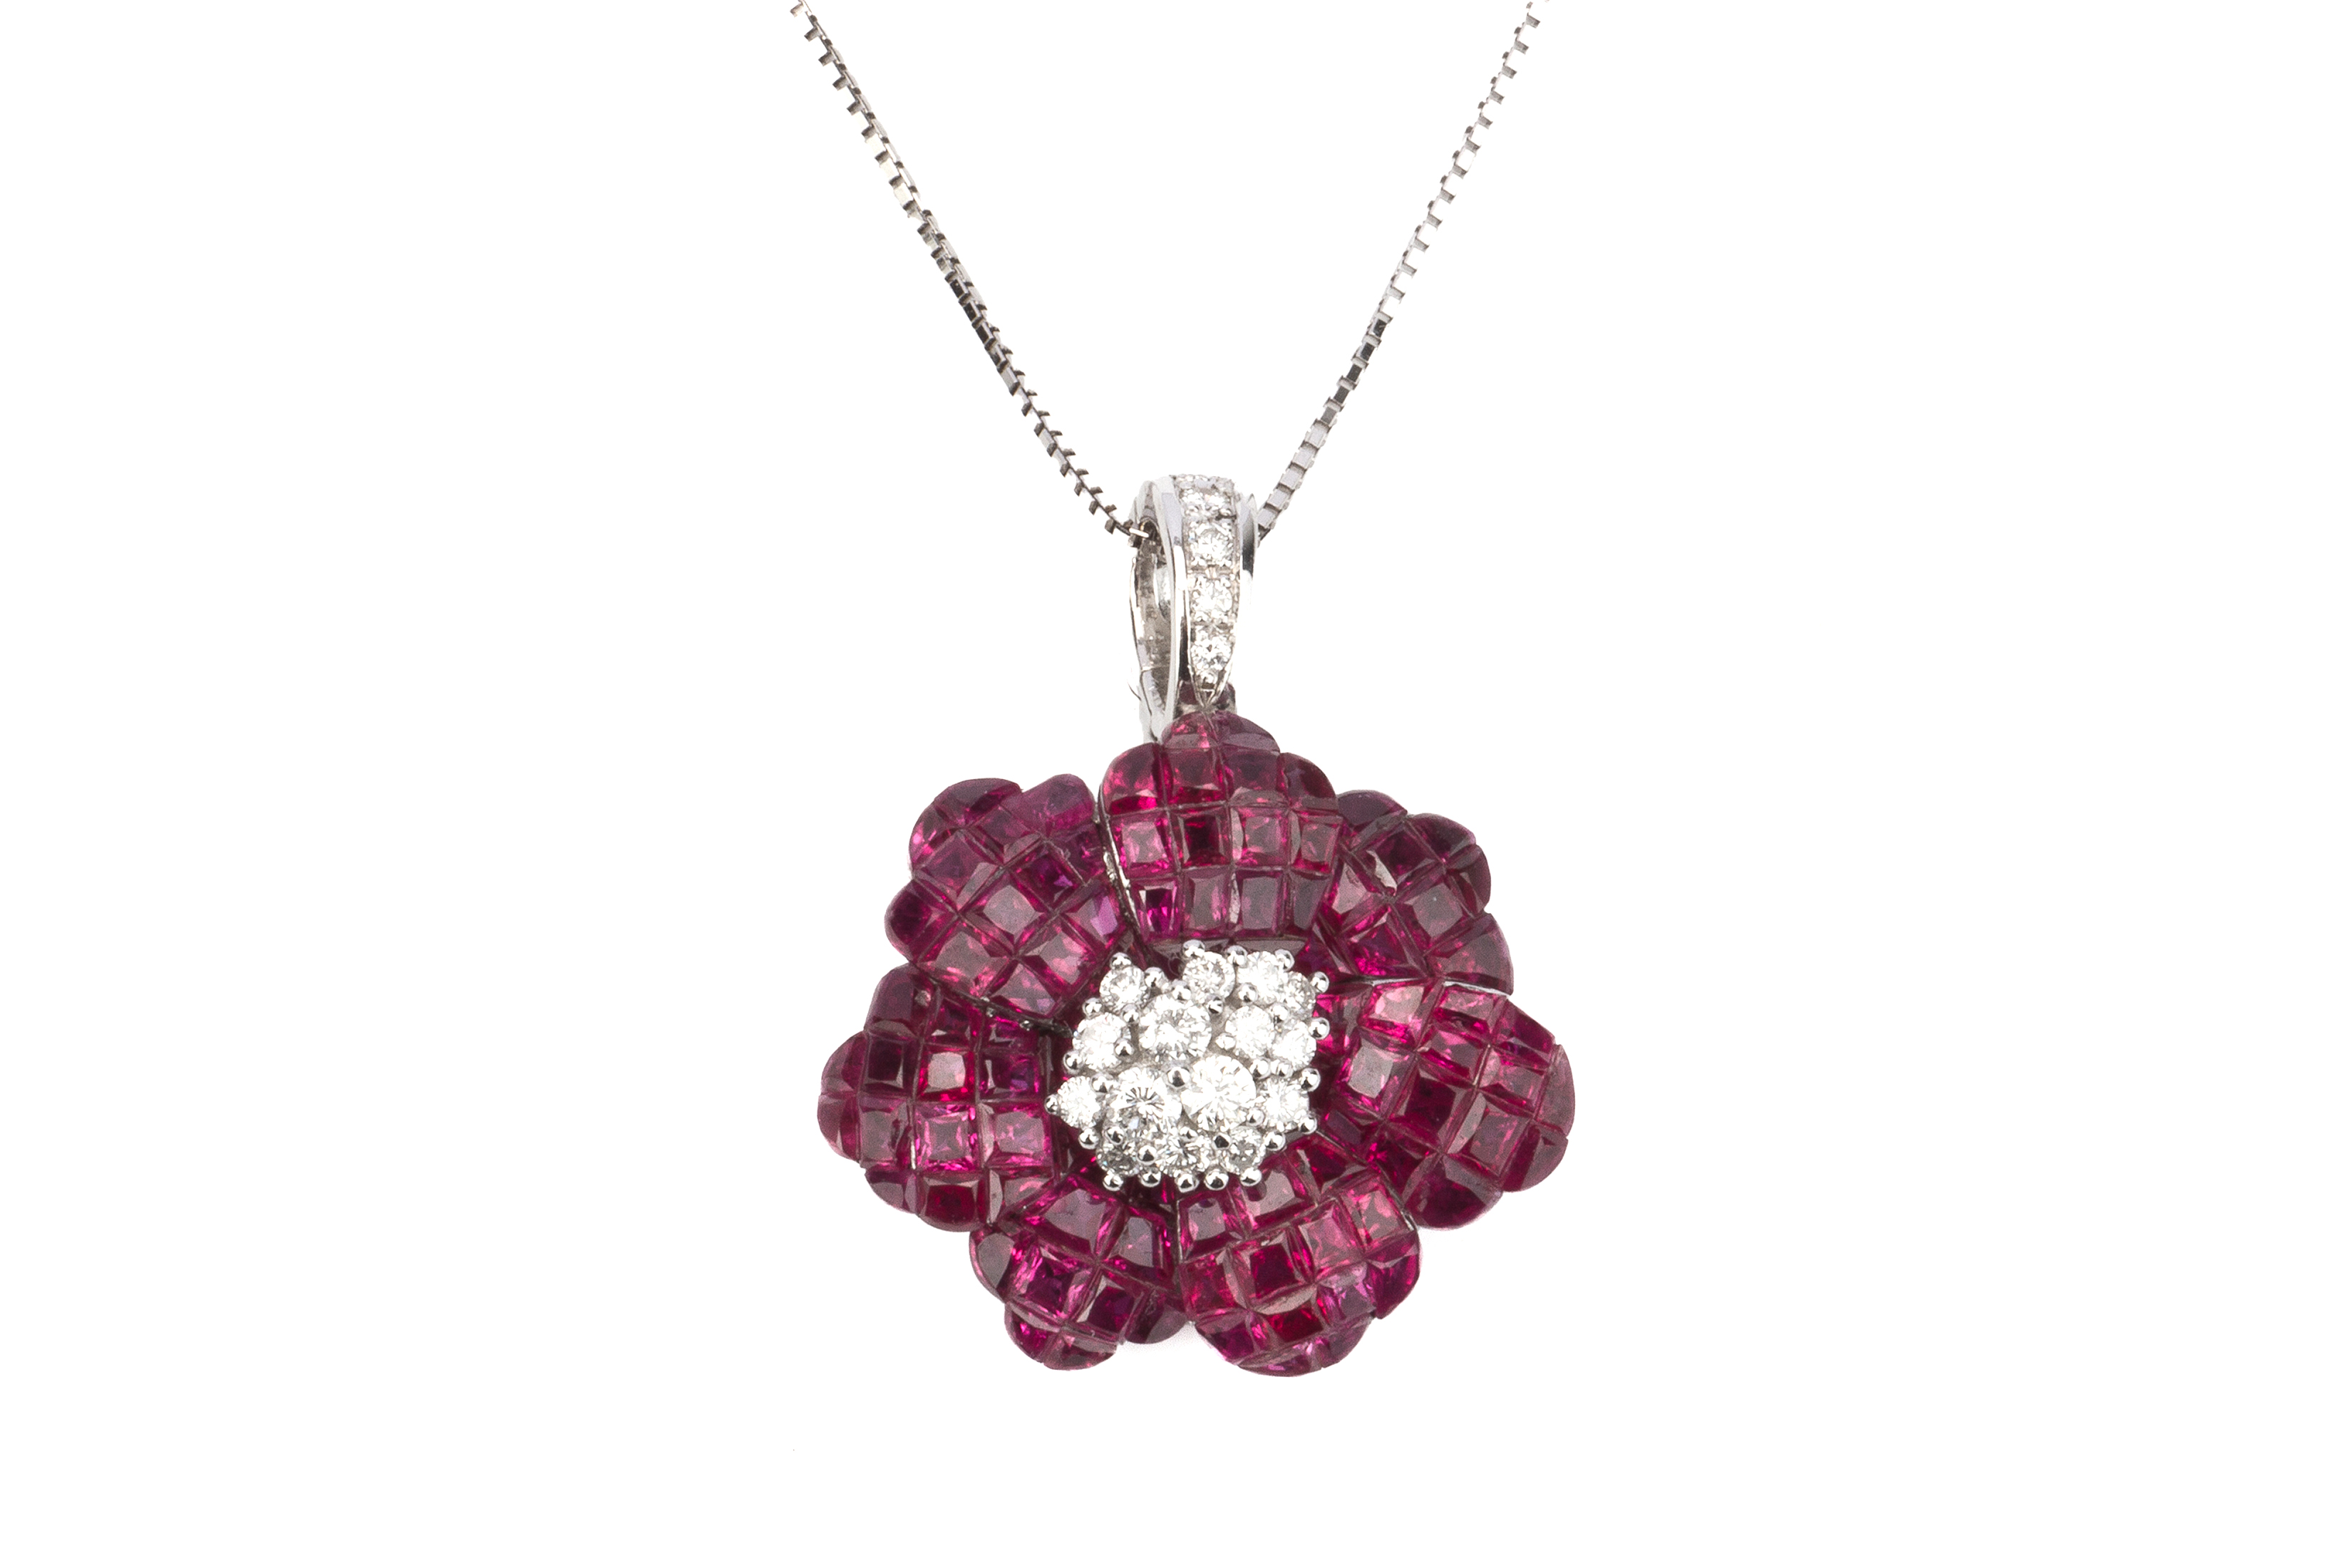 A RUBY AND DIAMOND PENDANT ON CHAIN